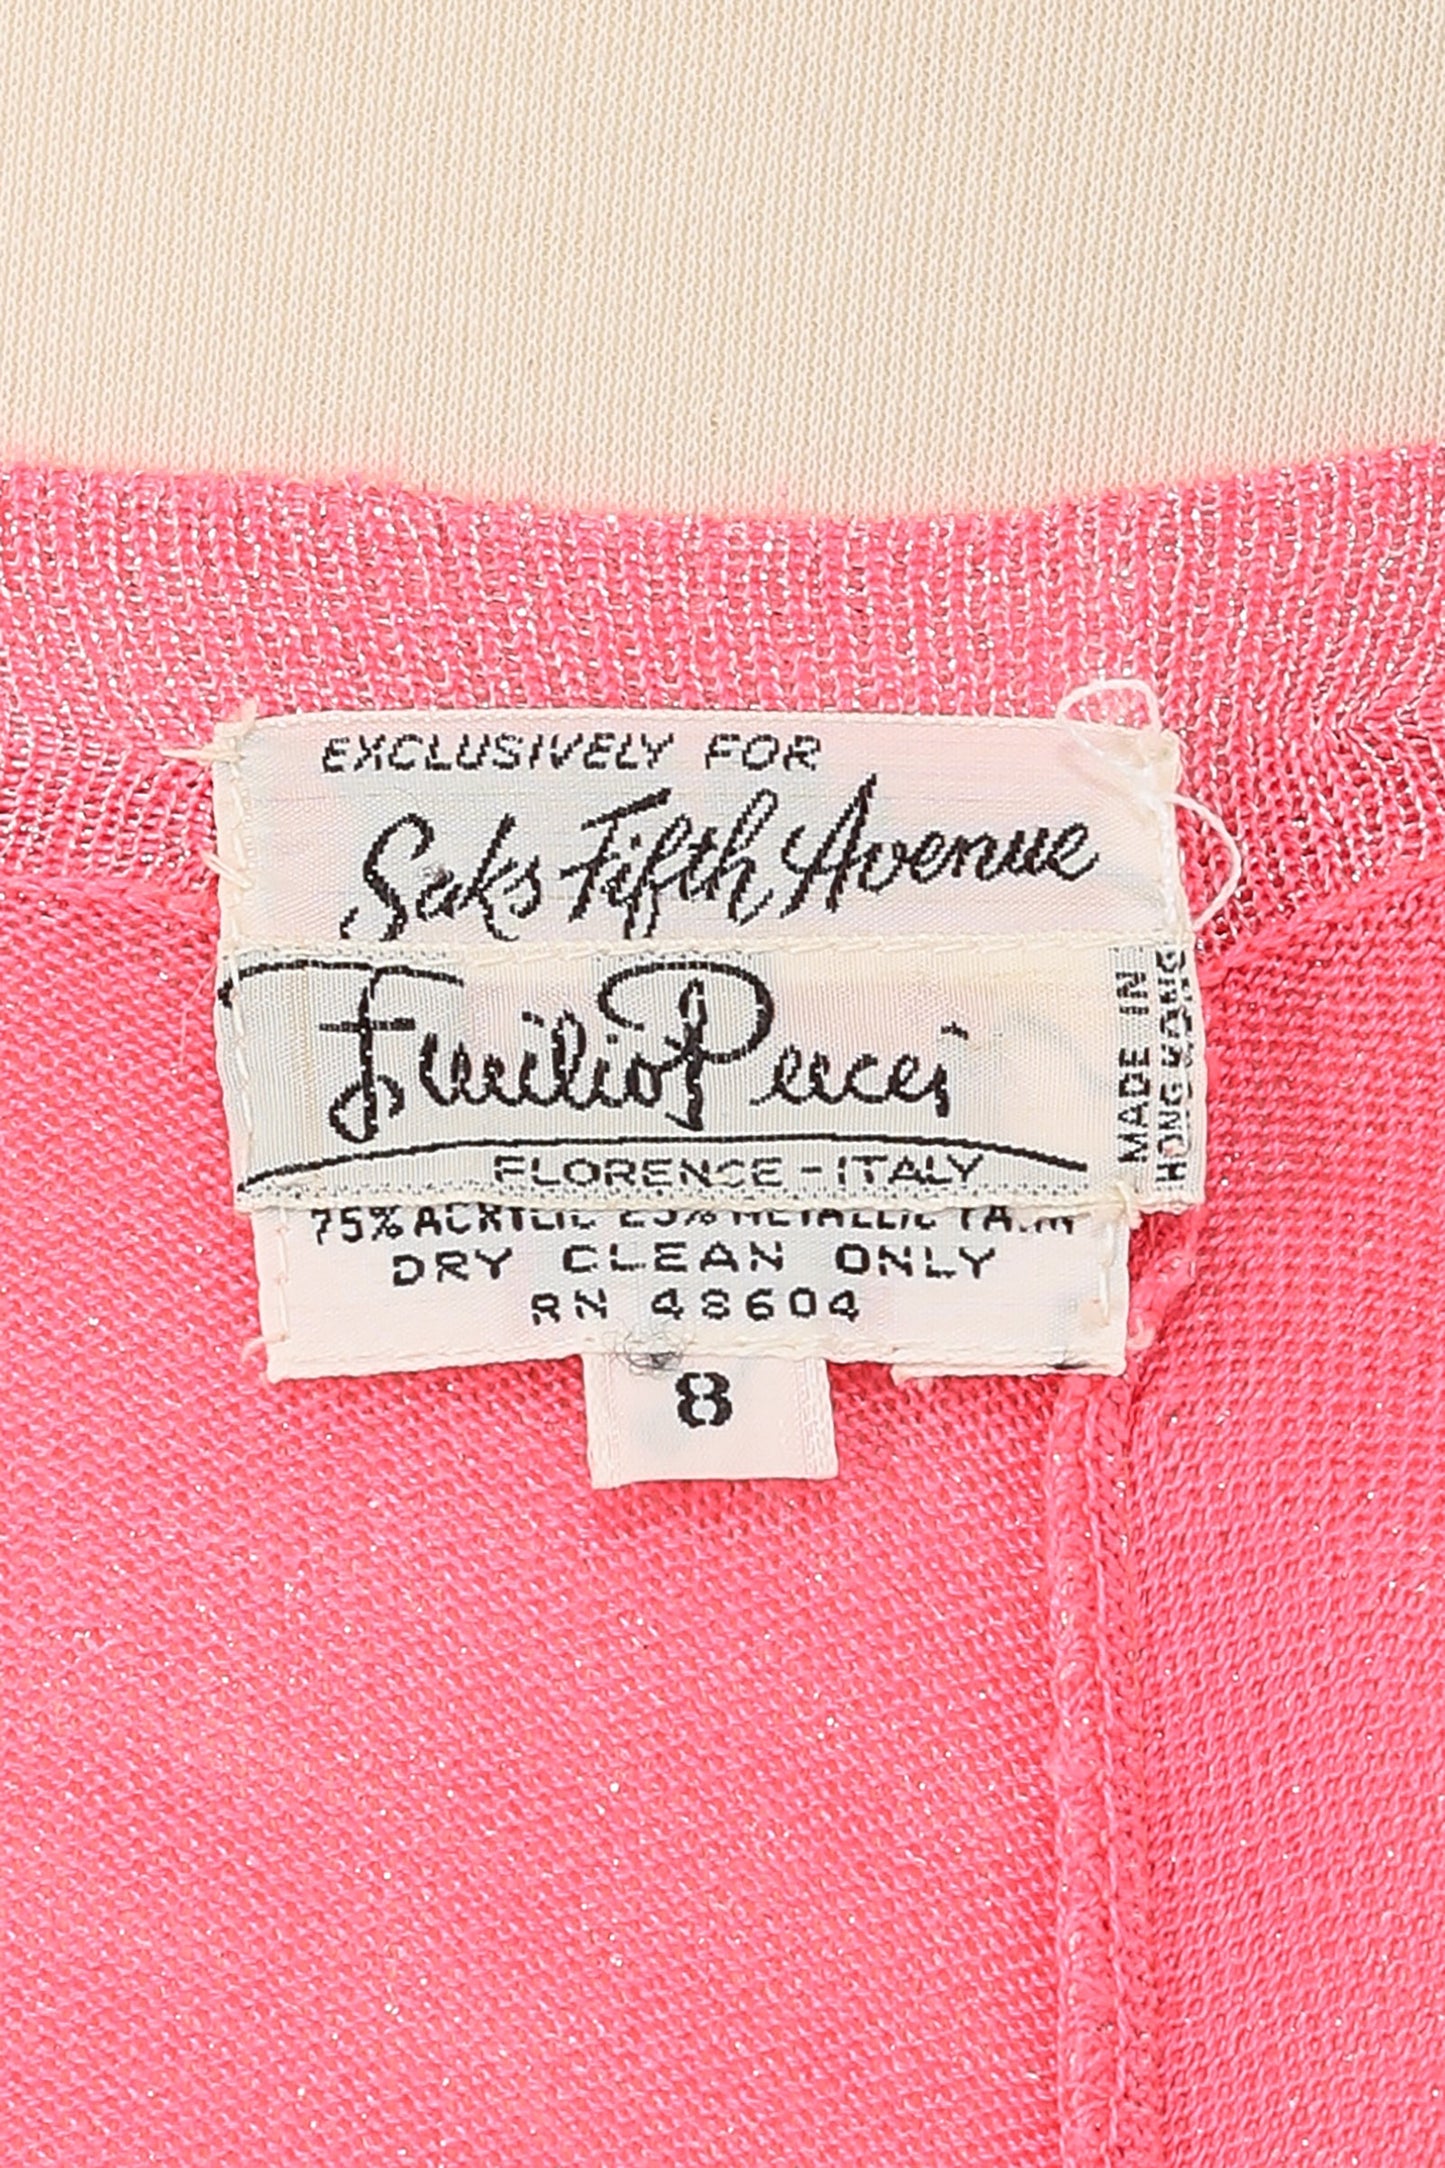 Emilio Pucci 1970s Pink Sparkle Knit Trousers and Sweater Set